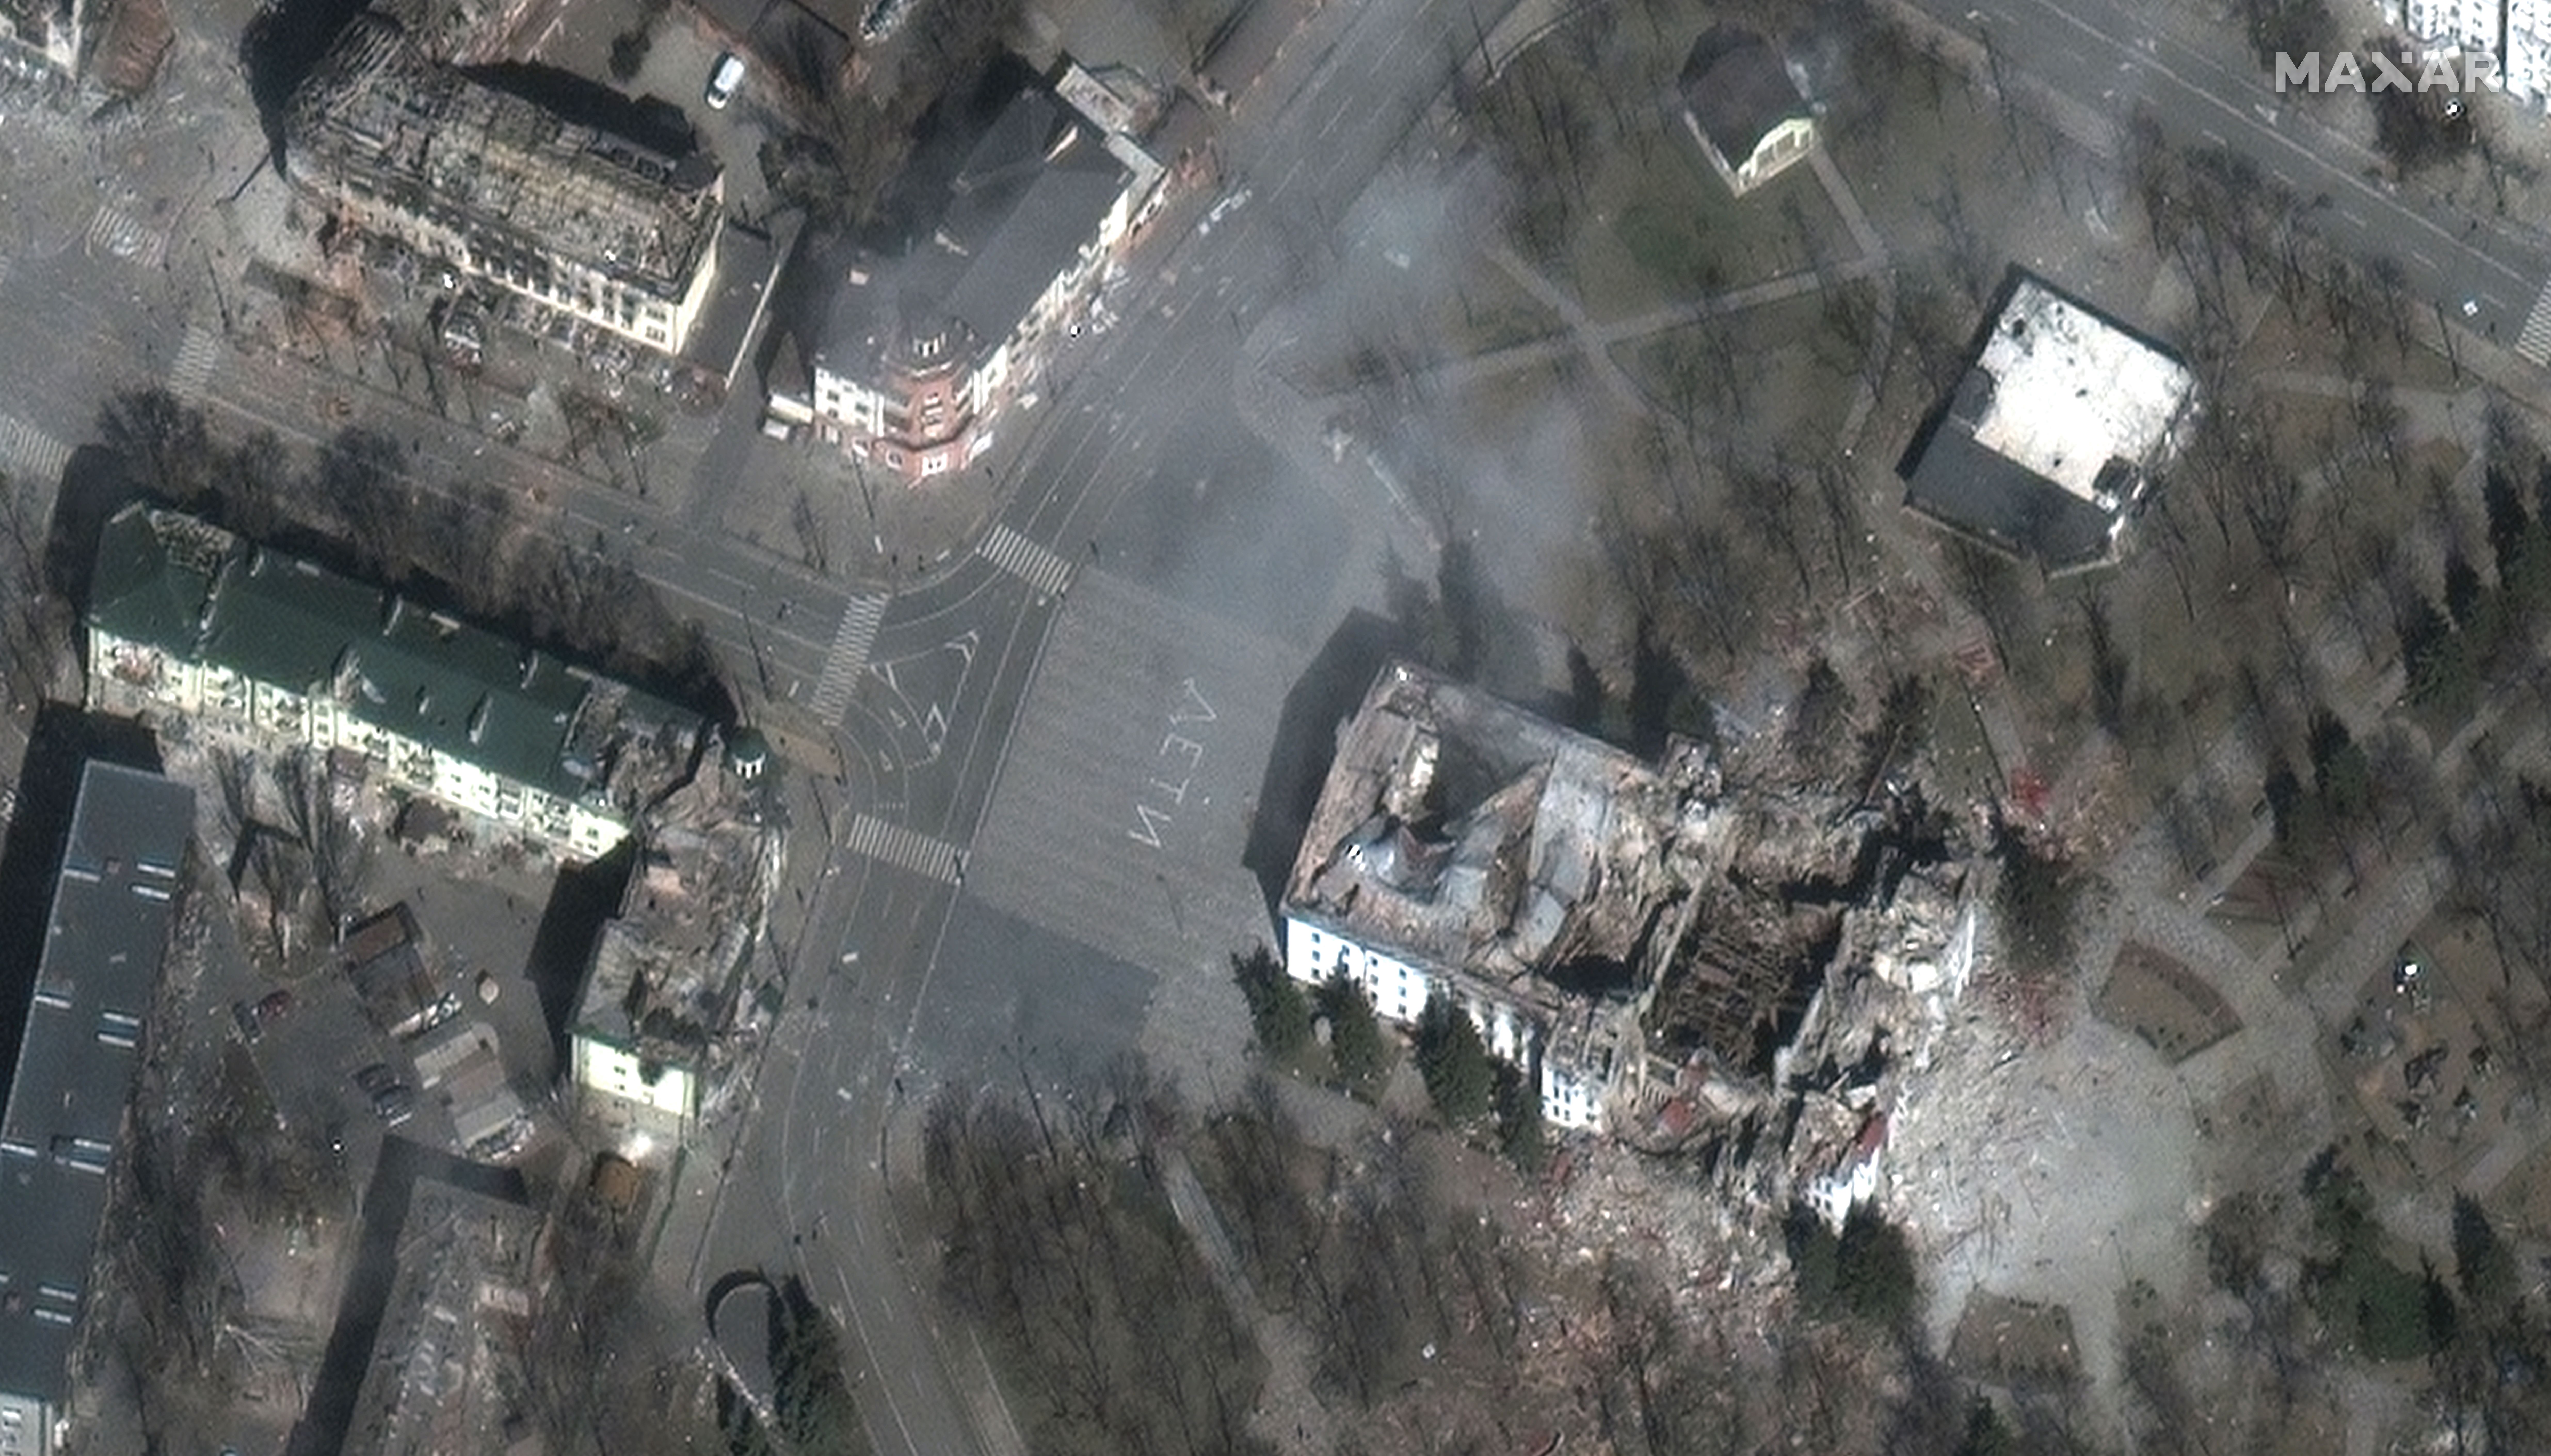 Downtown Mariupol showing extensive damage at and near Mariupol Theater on March 29.